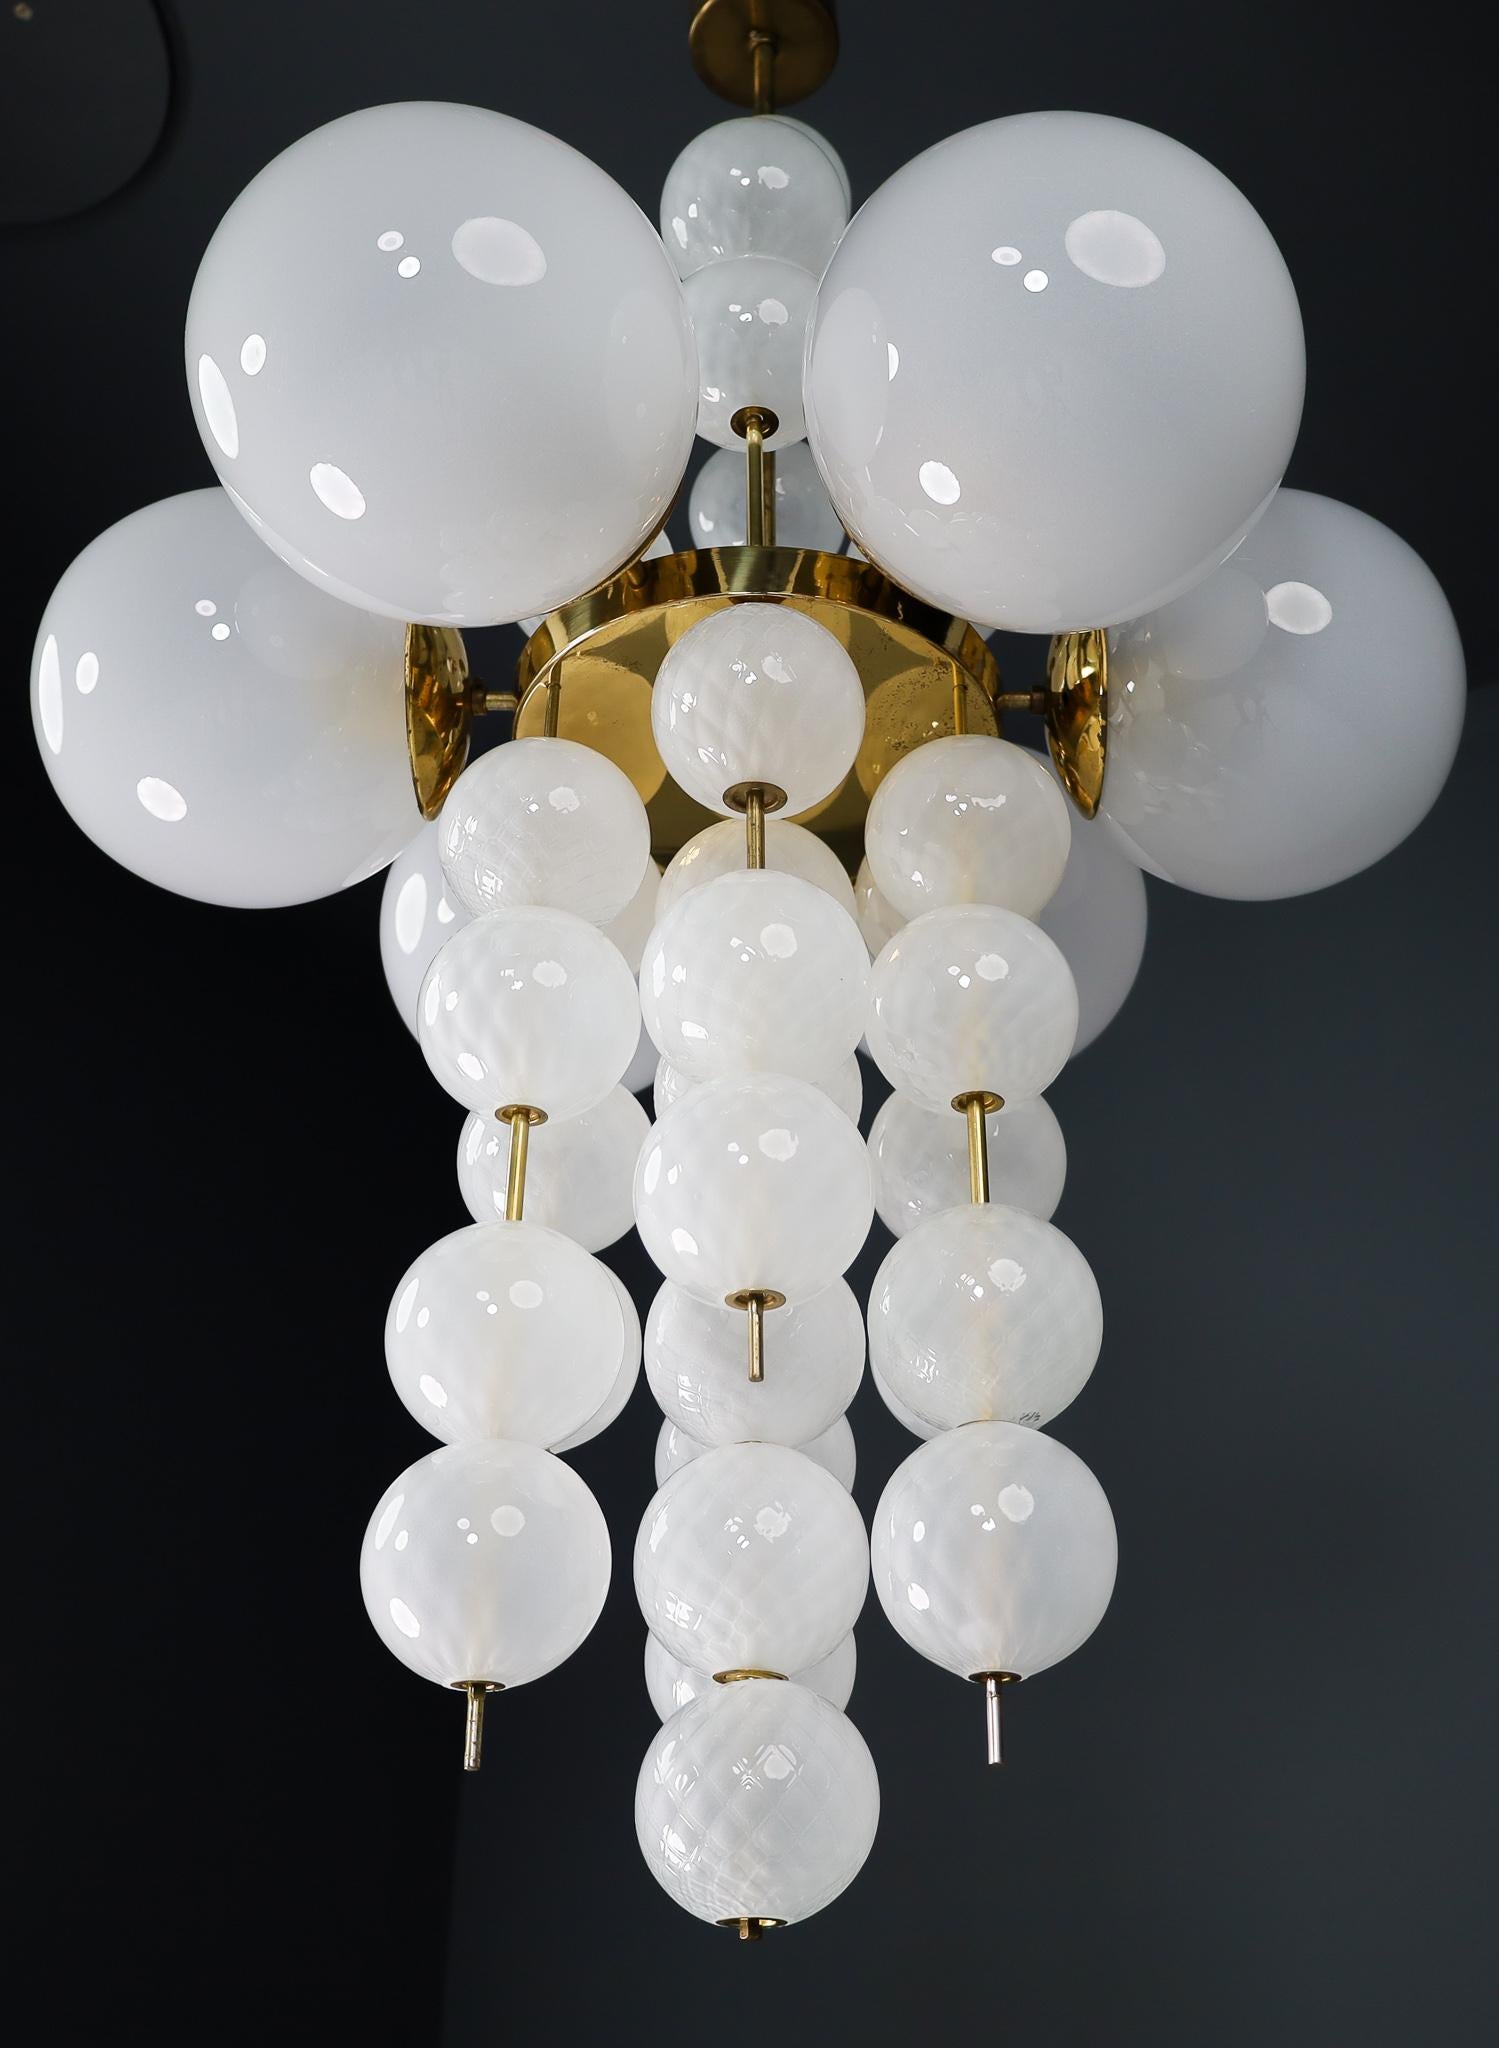 XL Hotel Chandelier with Brass Fixture and Hand-Blowed Frosted Glass Globes 6